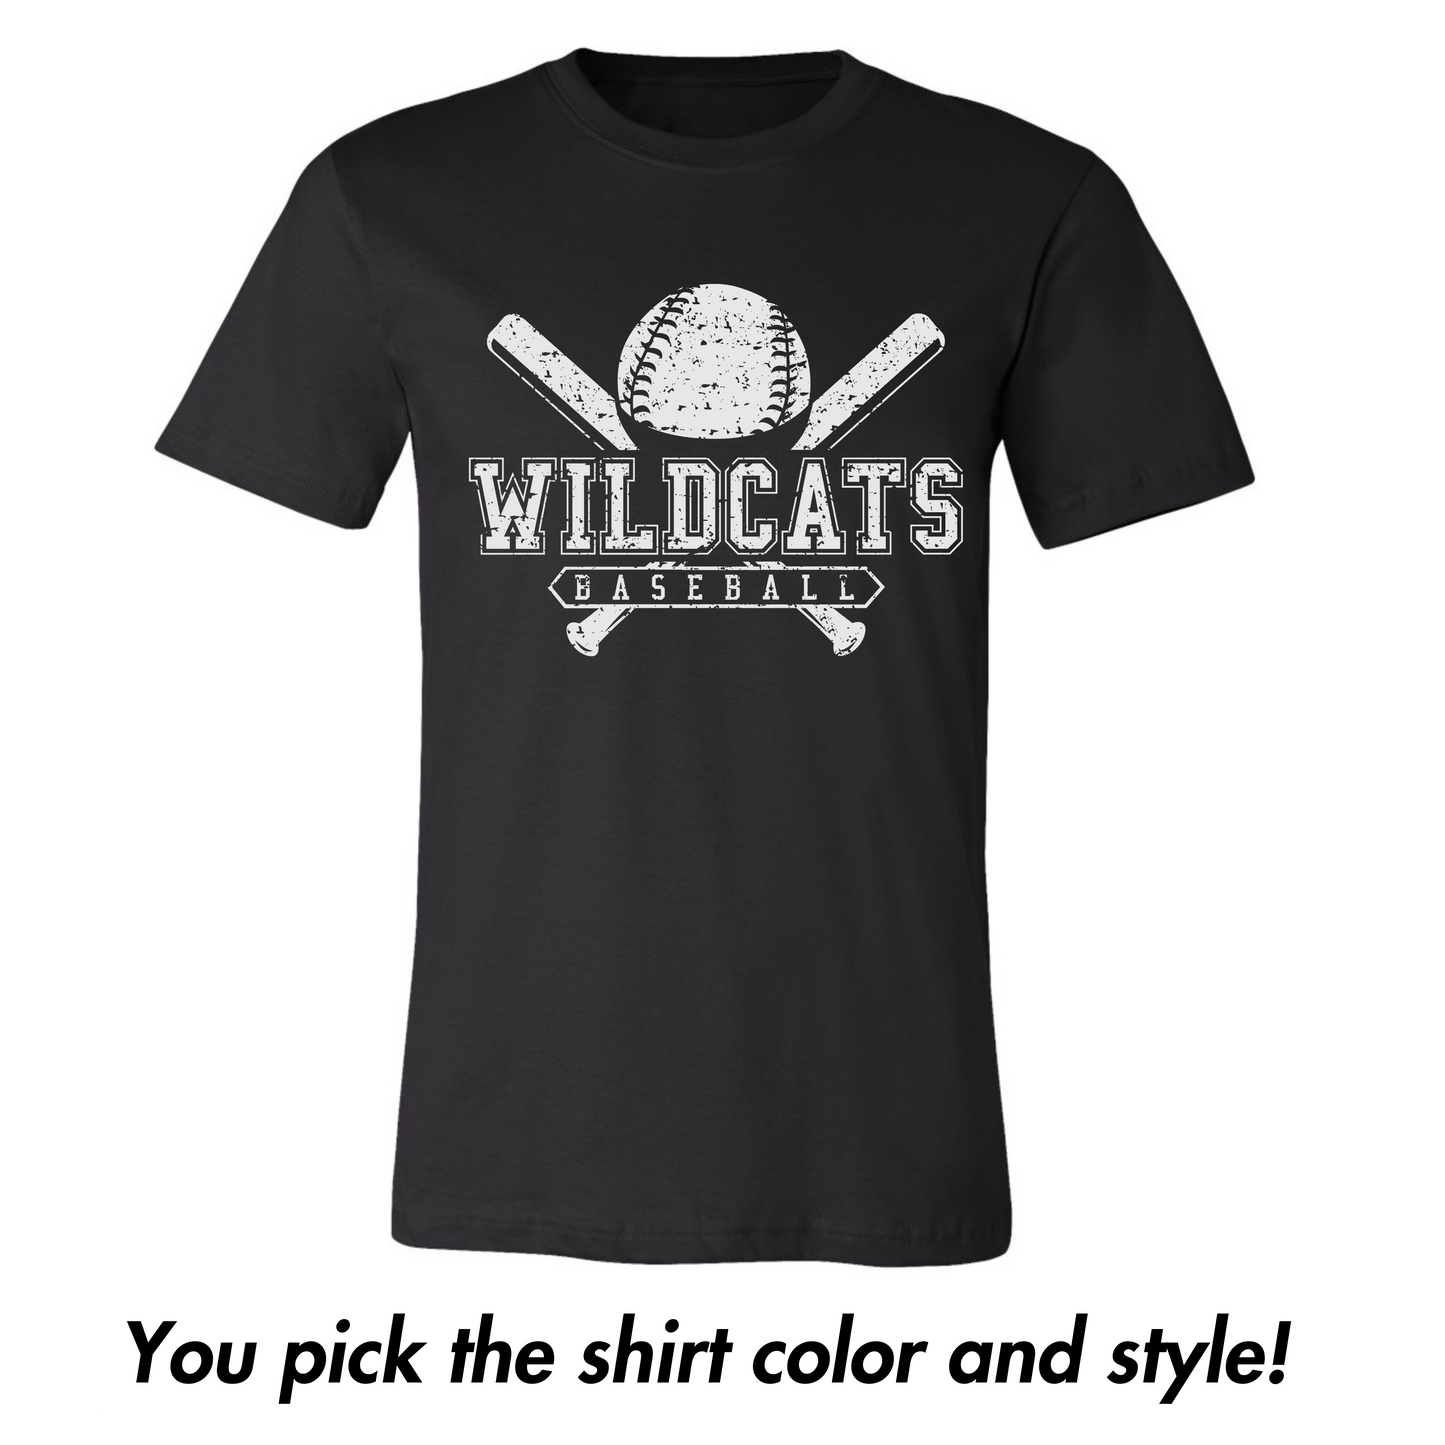 Wildcats Baseball- Distressed in White Print